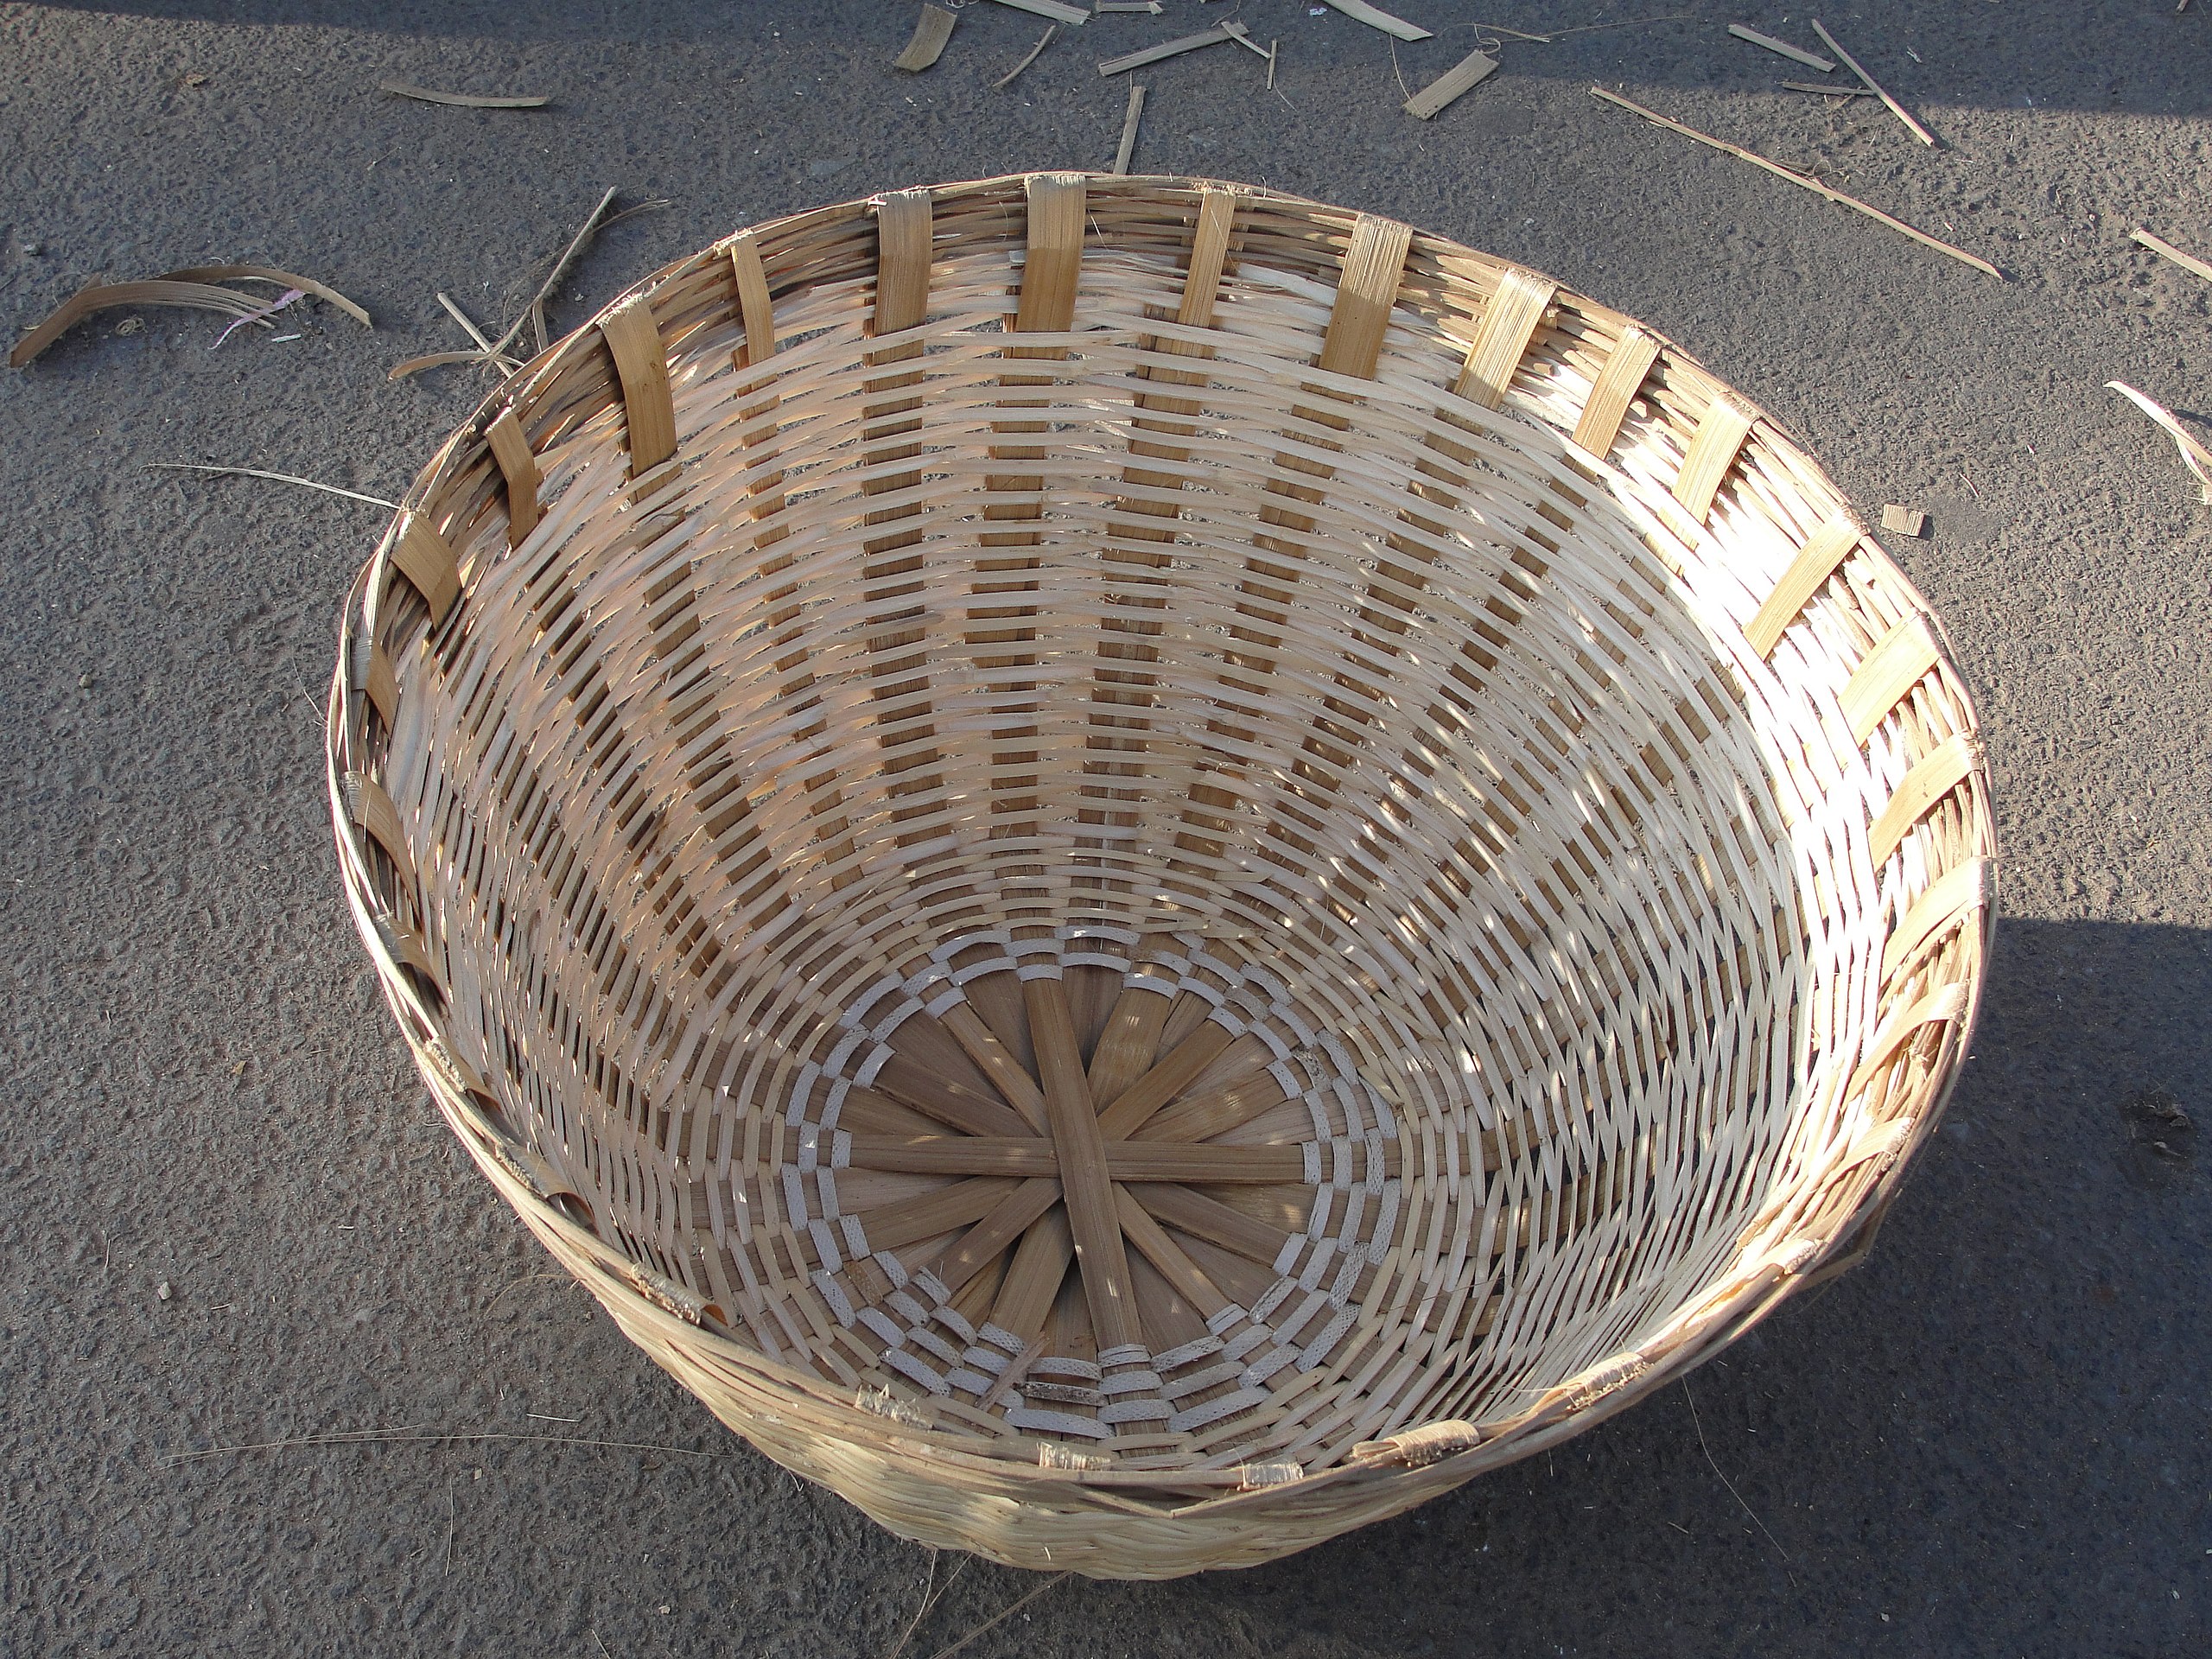 https://upload.wikimedia.org/wikipedia/commons/thumb/f/f8/A_bamboo_basket_big_in_size.JPG/2560px-A_bamboo_basket_big_in_size.JPG